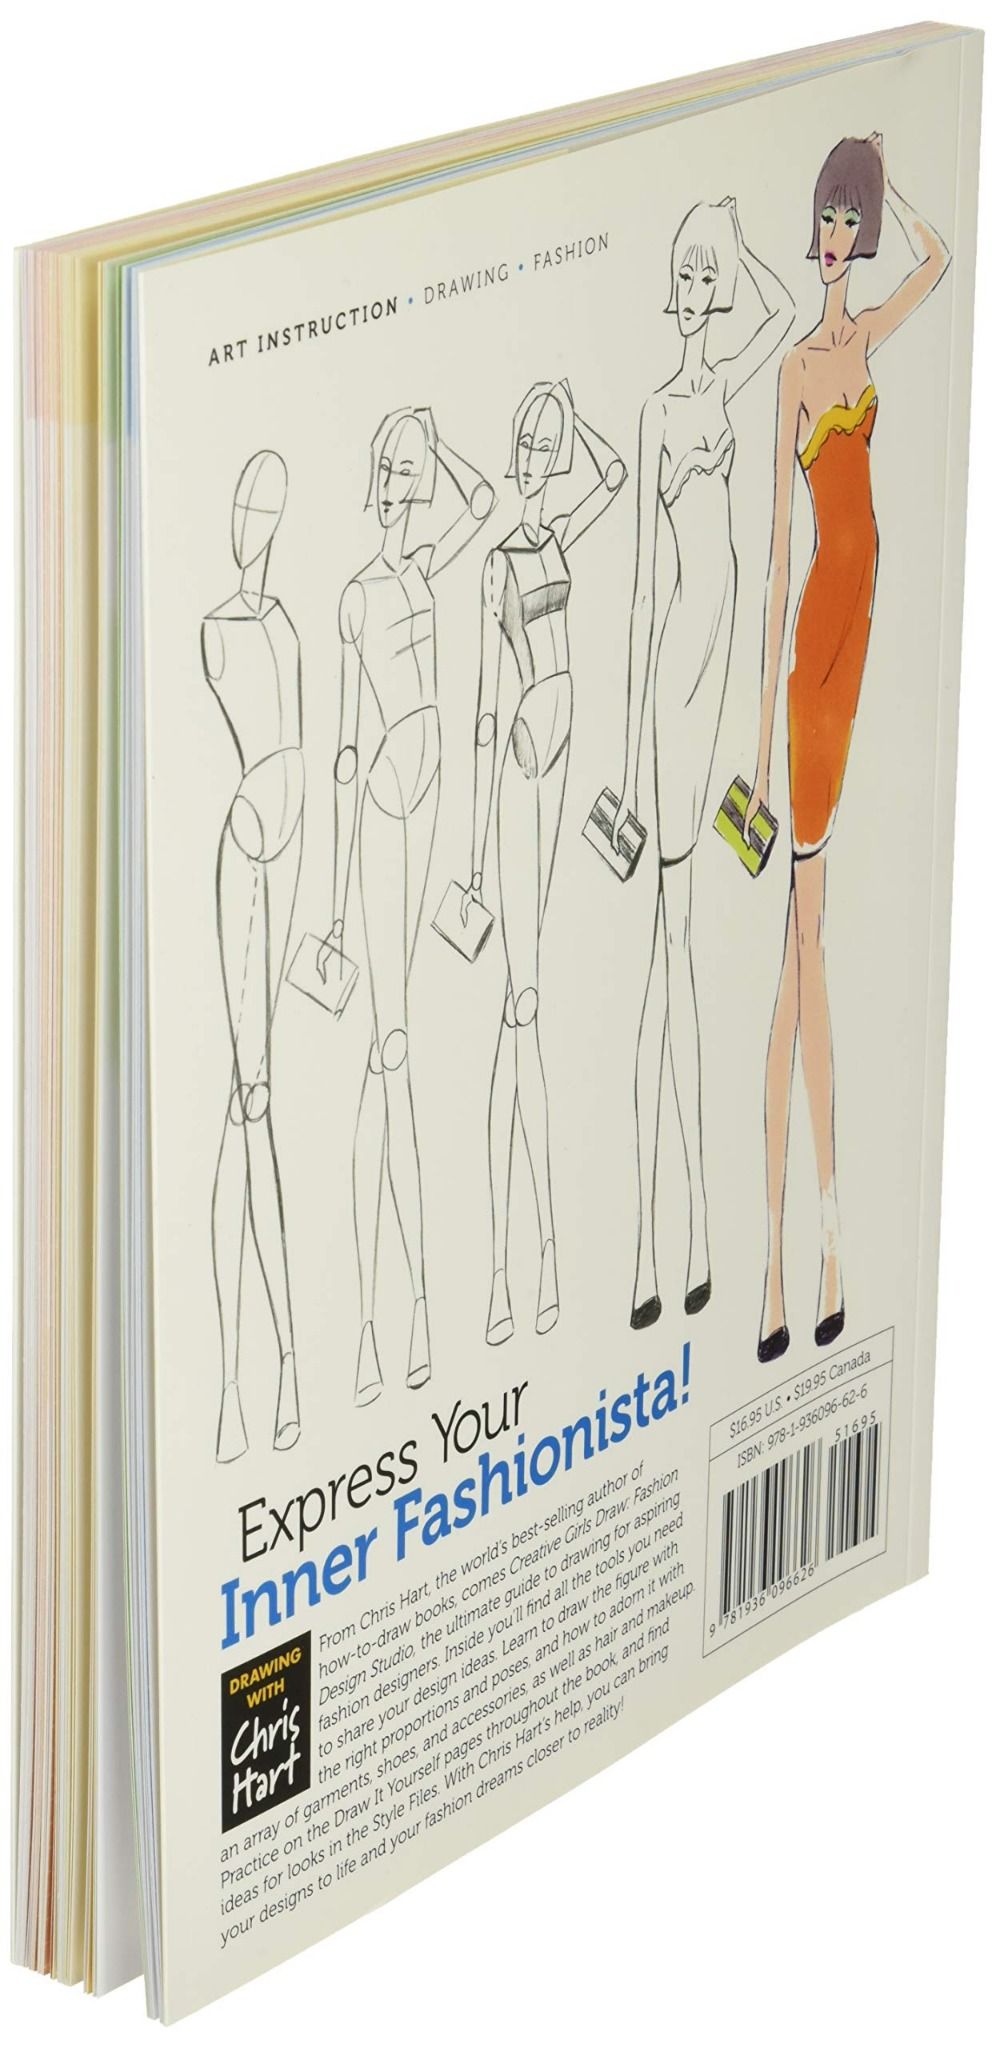  Fashion Design Studio : Learn to Draw Figures, Fashion, Hairstyles & More_Christopher Hart_9781936096626_Sixth and Spring Books 